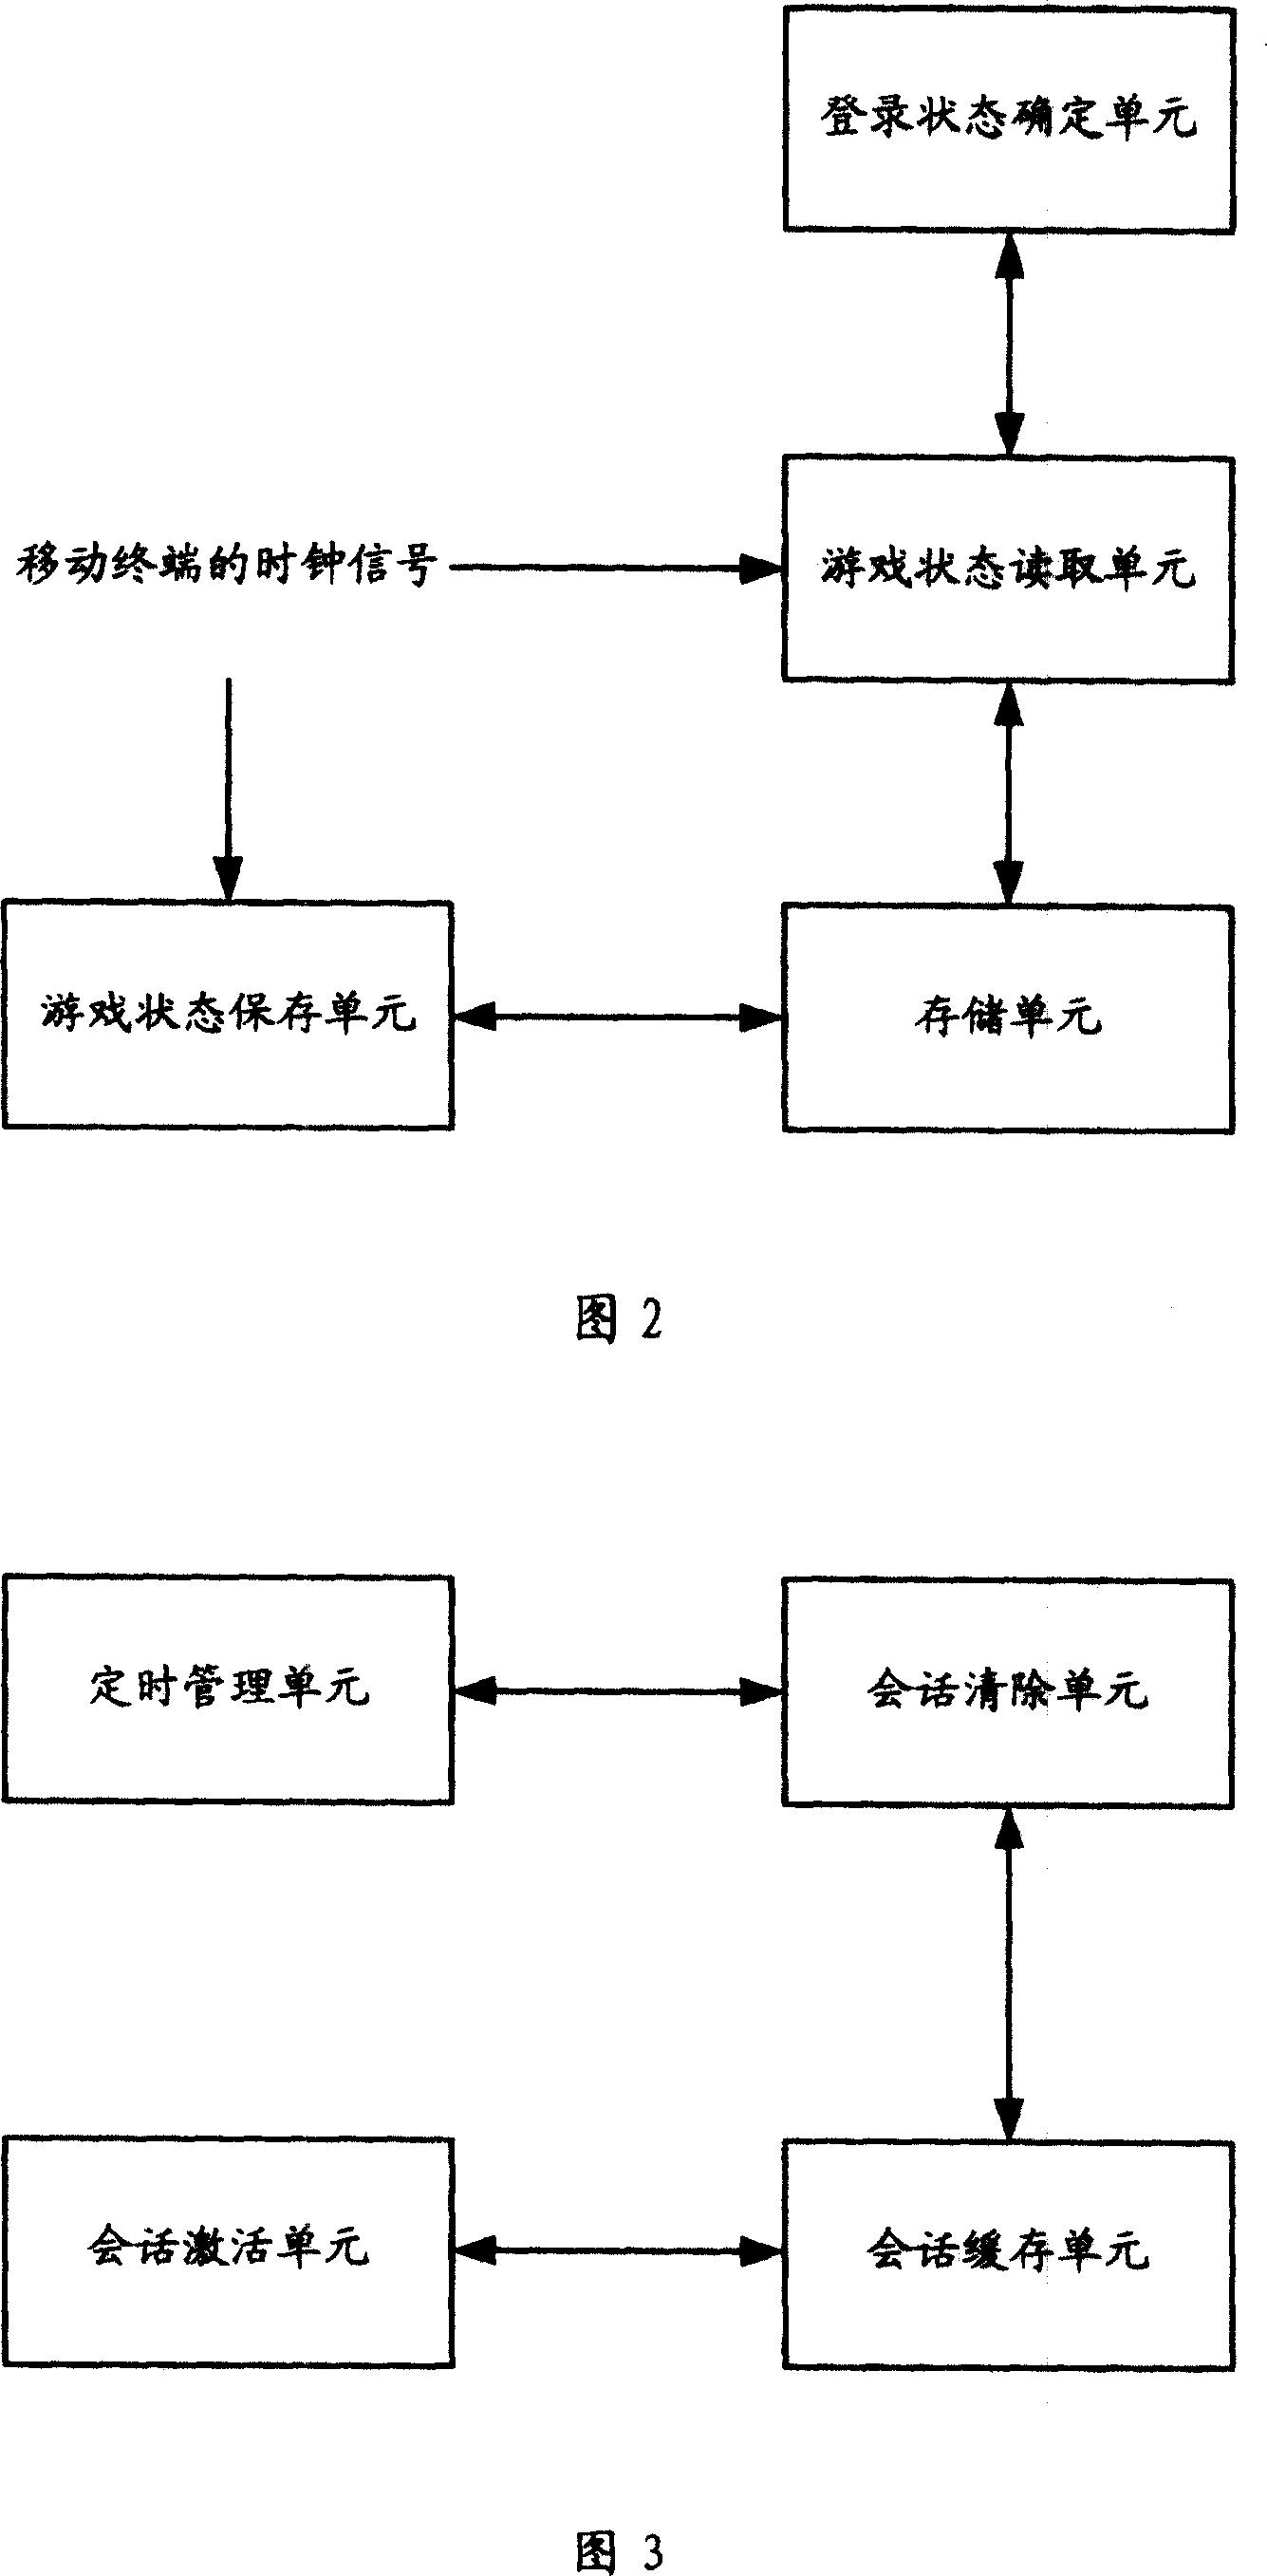 Method of automatically recovering of mobile terminal on internet game interrupting and system thereof